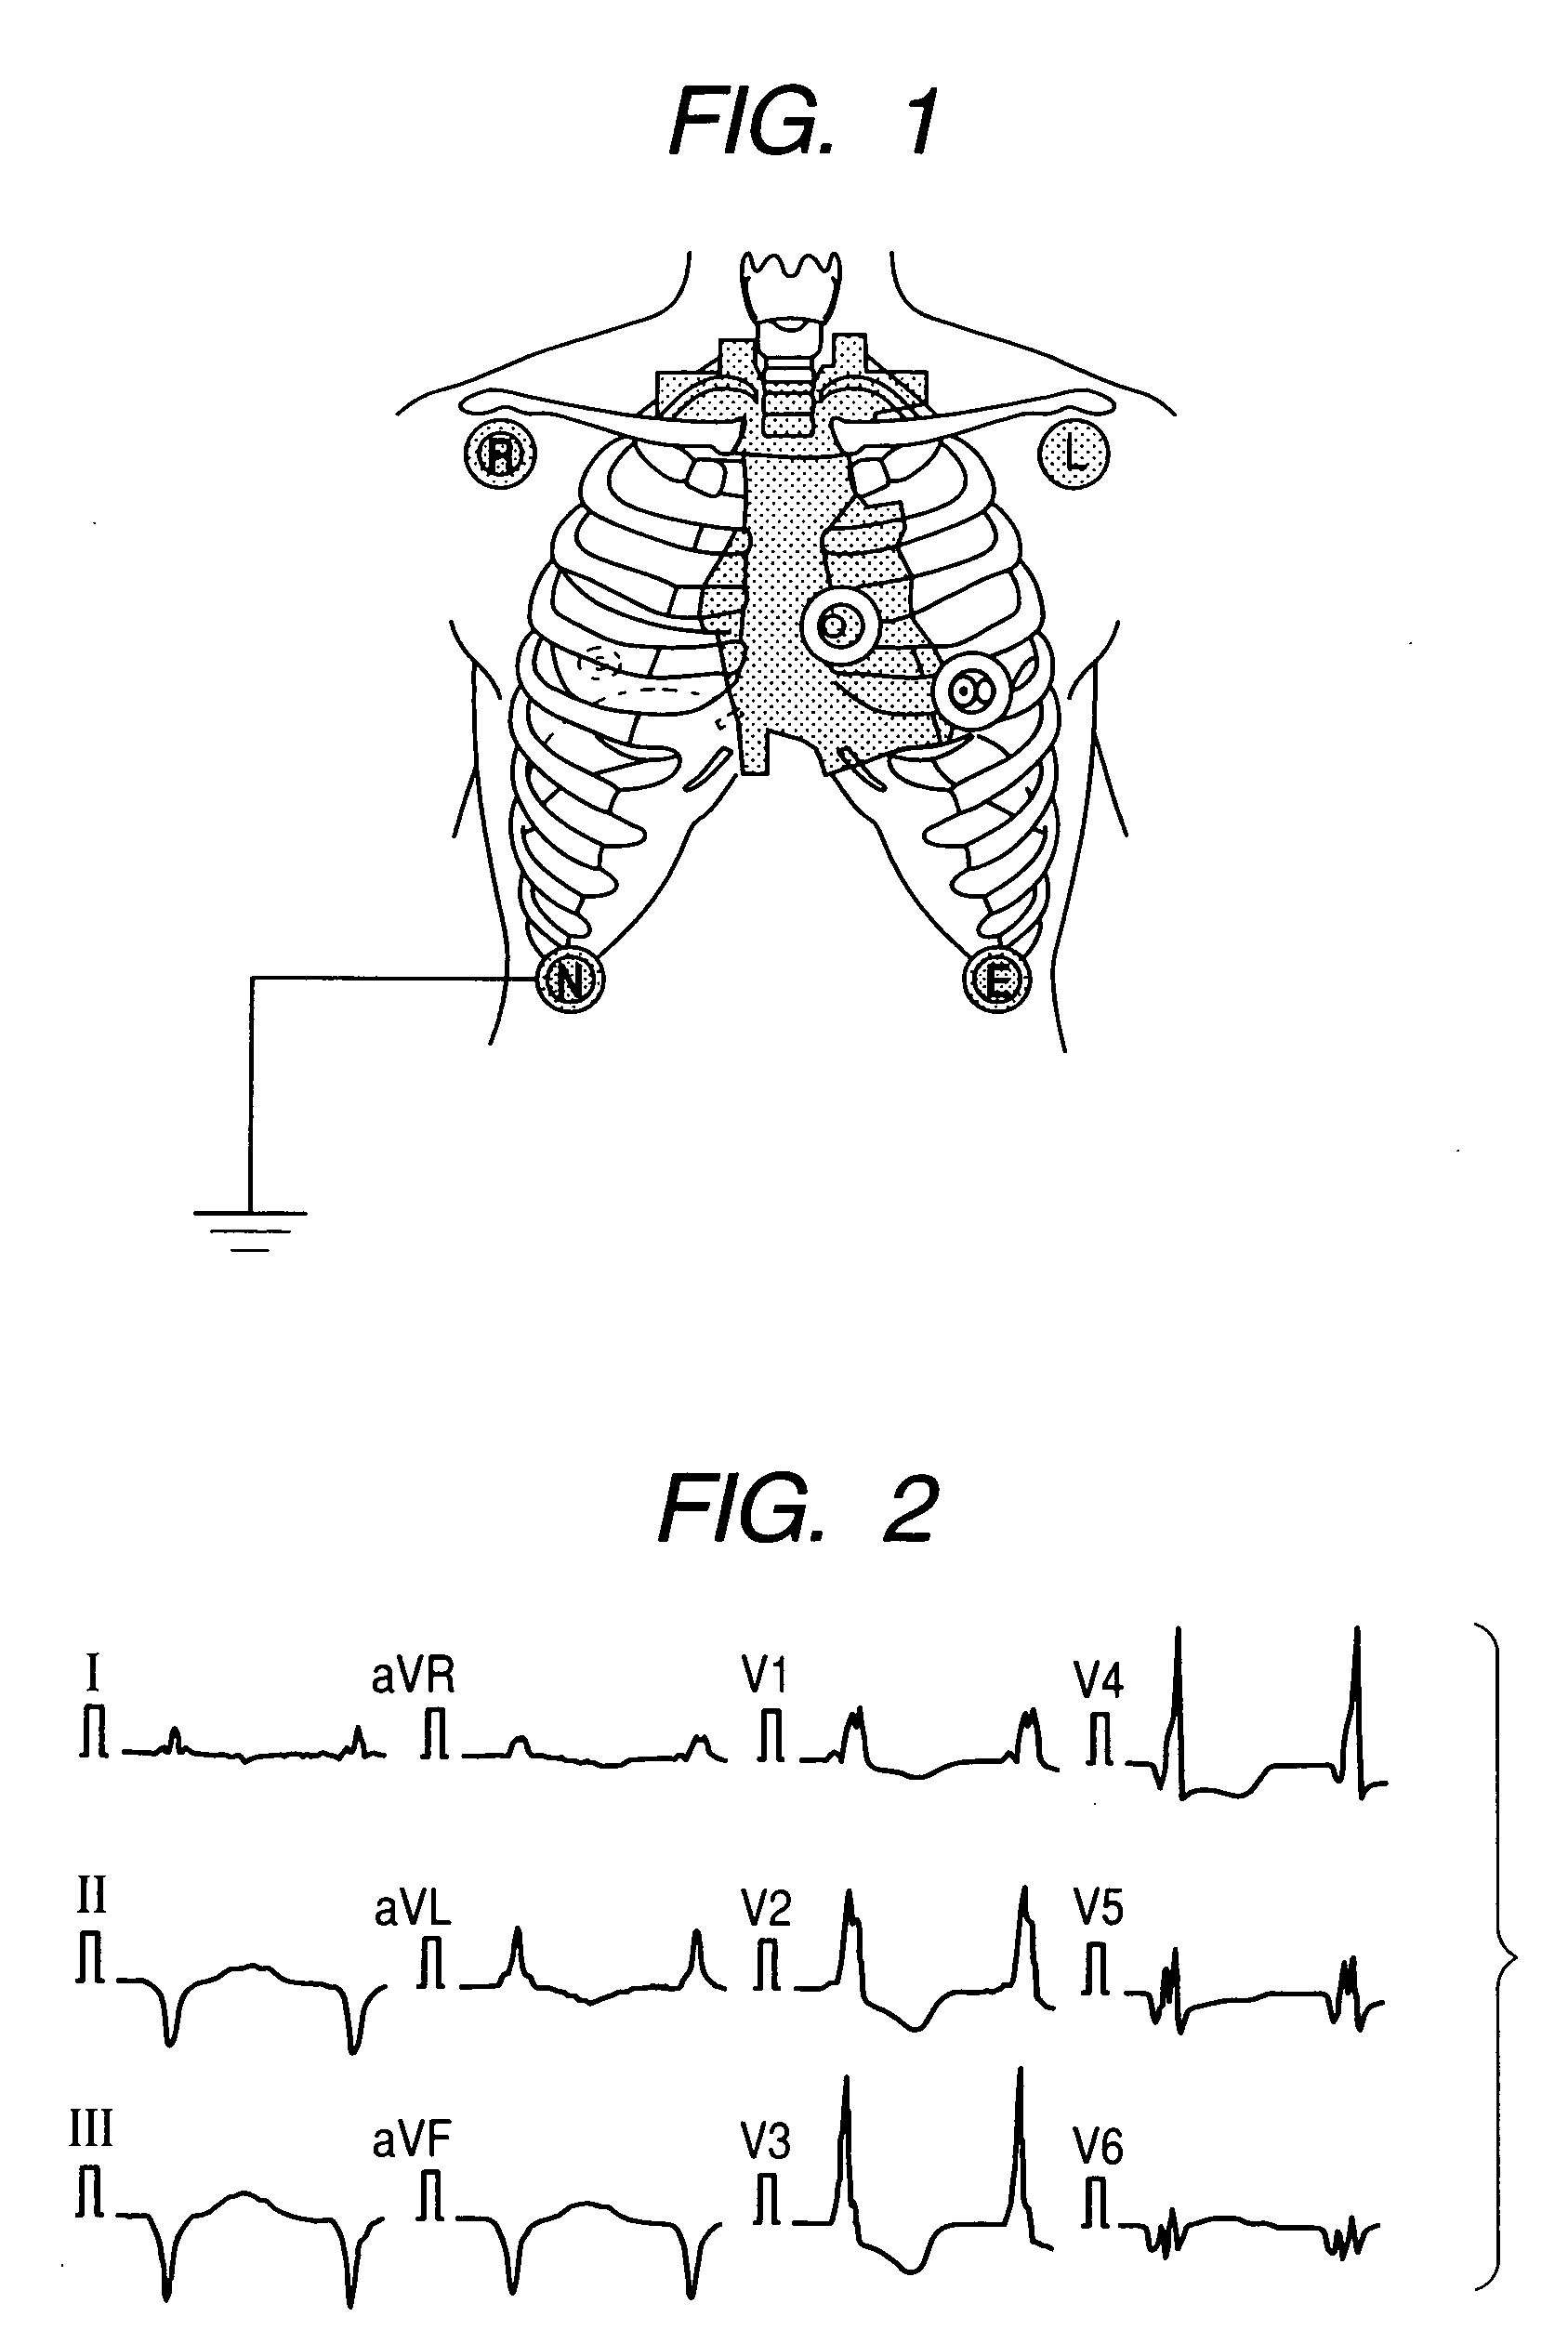 Method for deriving standard 12-lead electrocardiogram, and monitoring apparatus using the same